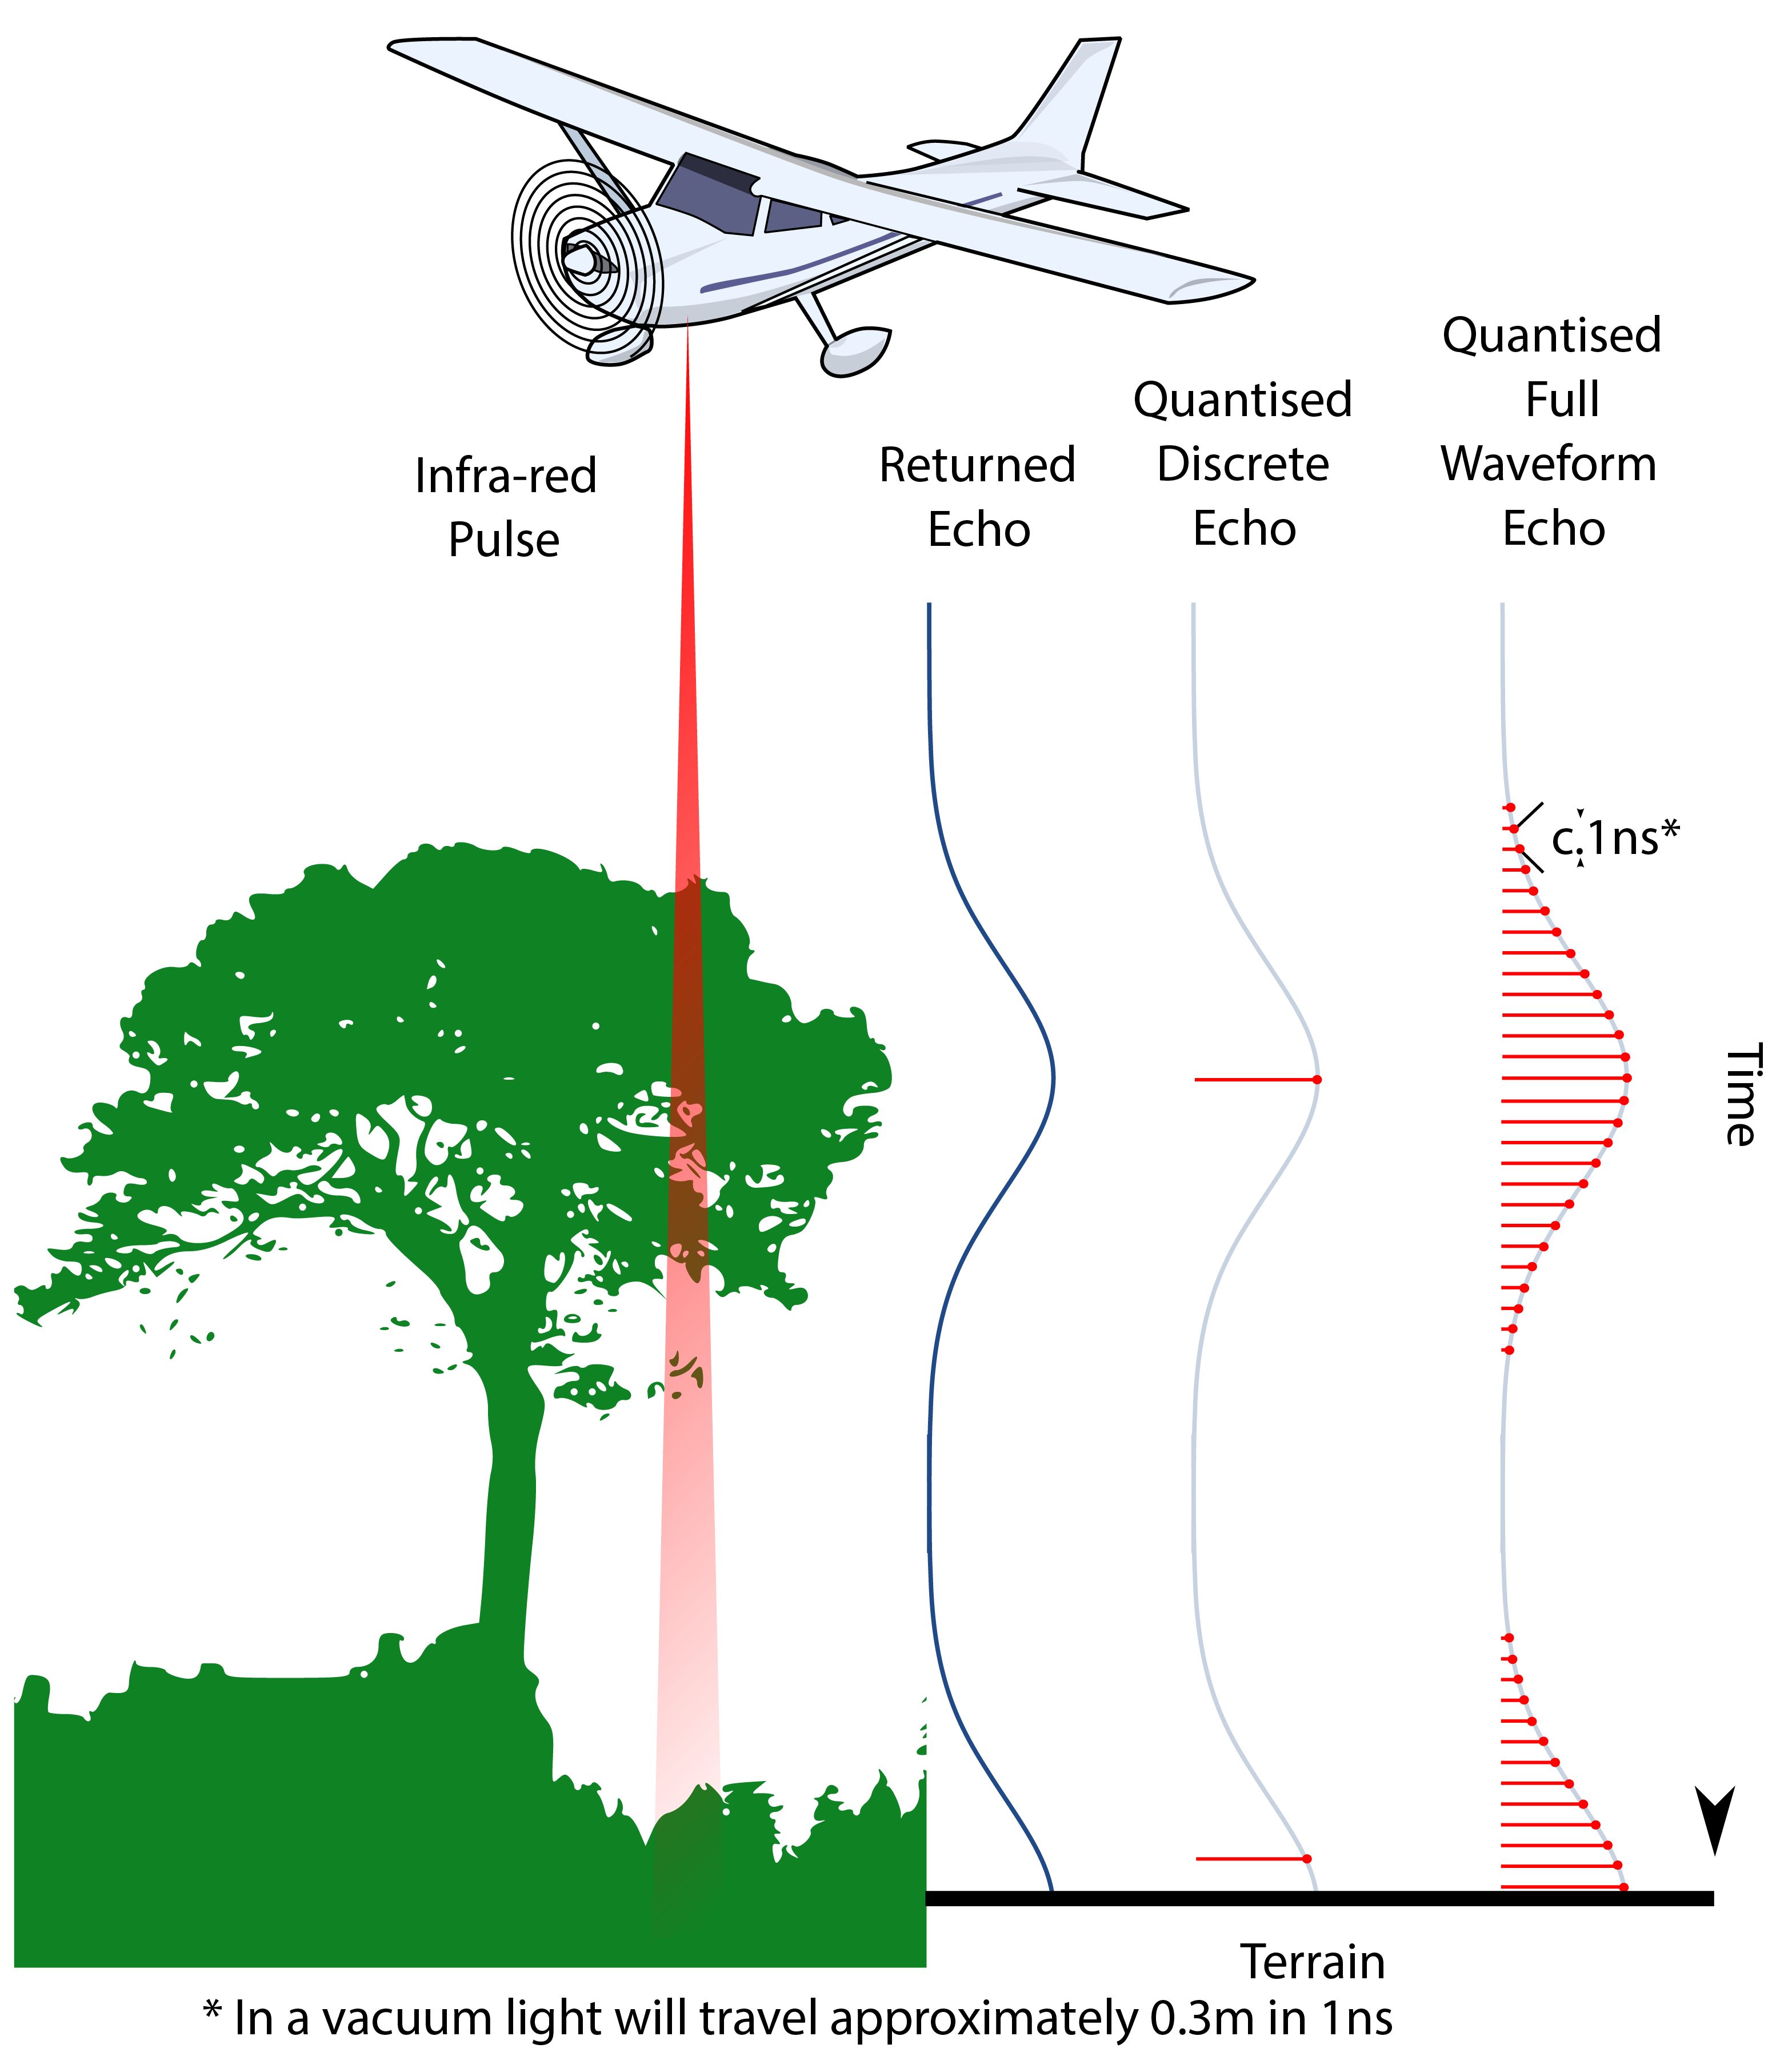 Differents in the response between discrete echo and full waveform LiDAR. 'Airborne Laser Scanning Discrete Echo and Full Waveform signal comparison', @beck_airborne_2012, CC-BY-SA-3.0.